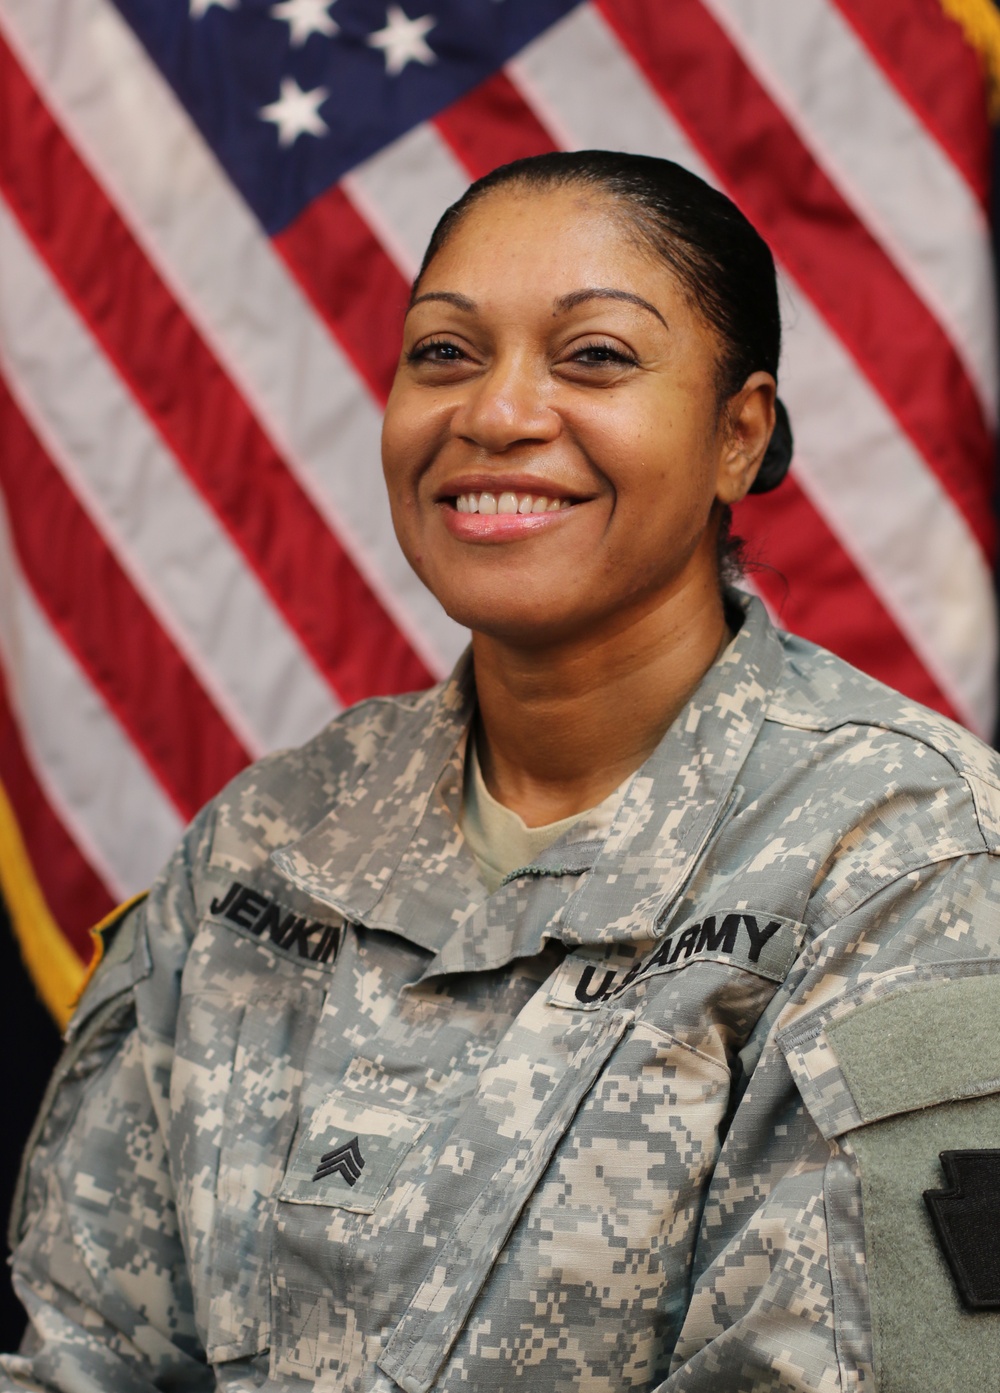 Citizen Soldier helps pave the way for gender equality